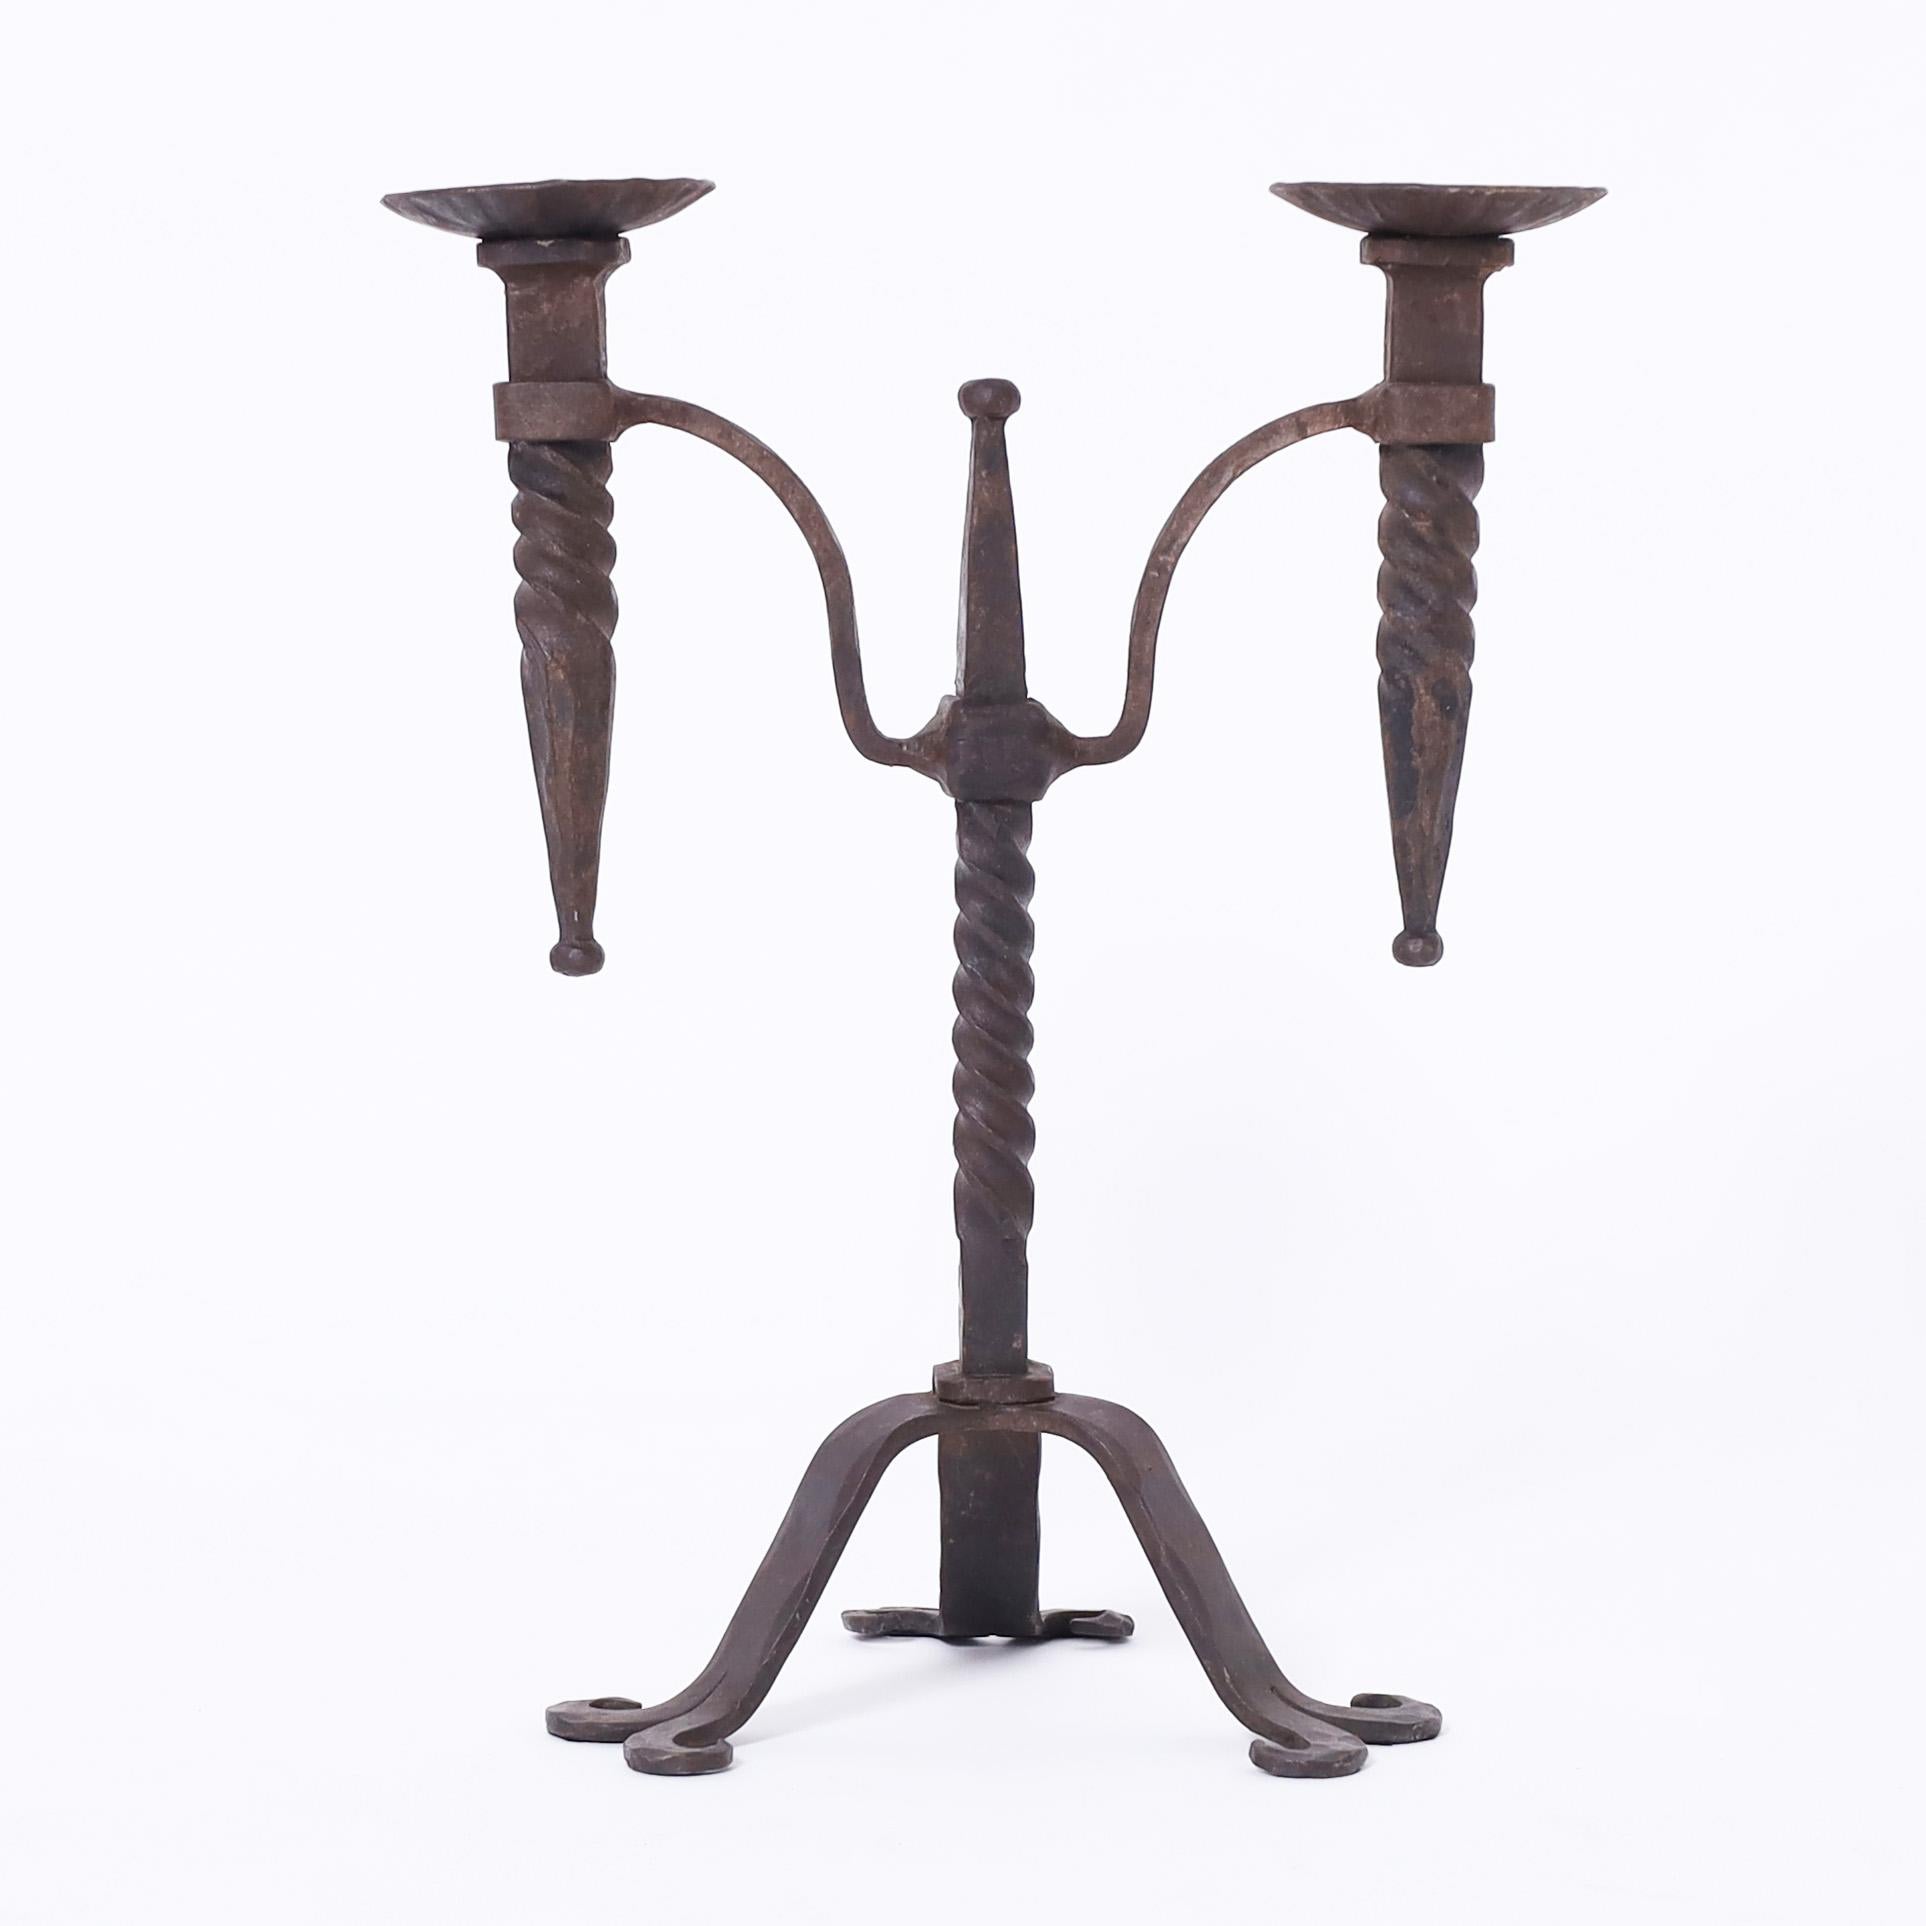 Standout pair of 19th century French hand wrought iron candle sticks each with two candle holders attached to a twisted center post on three cabriole legs.